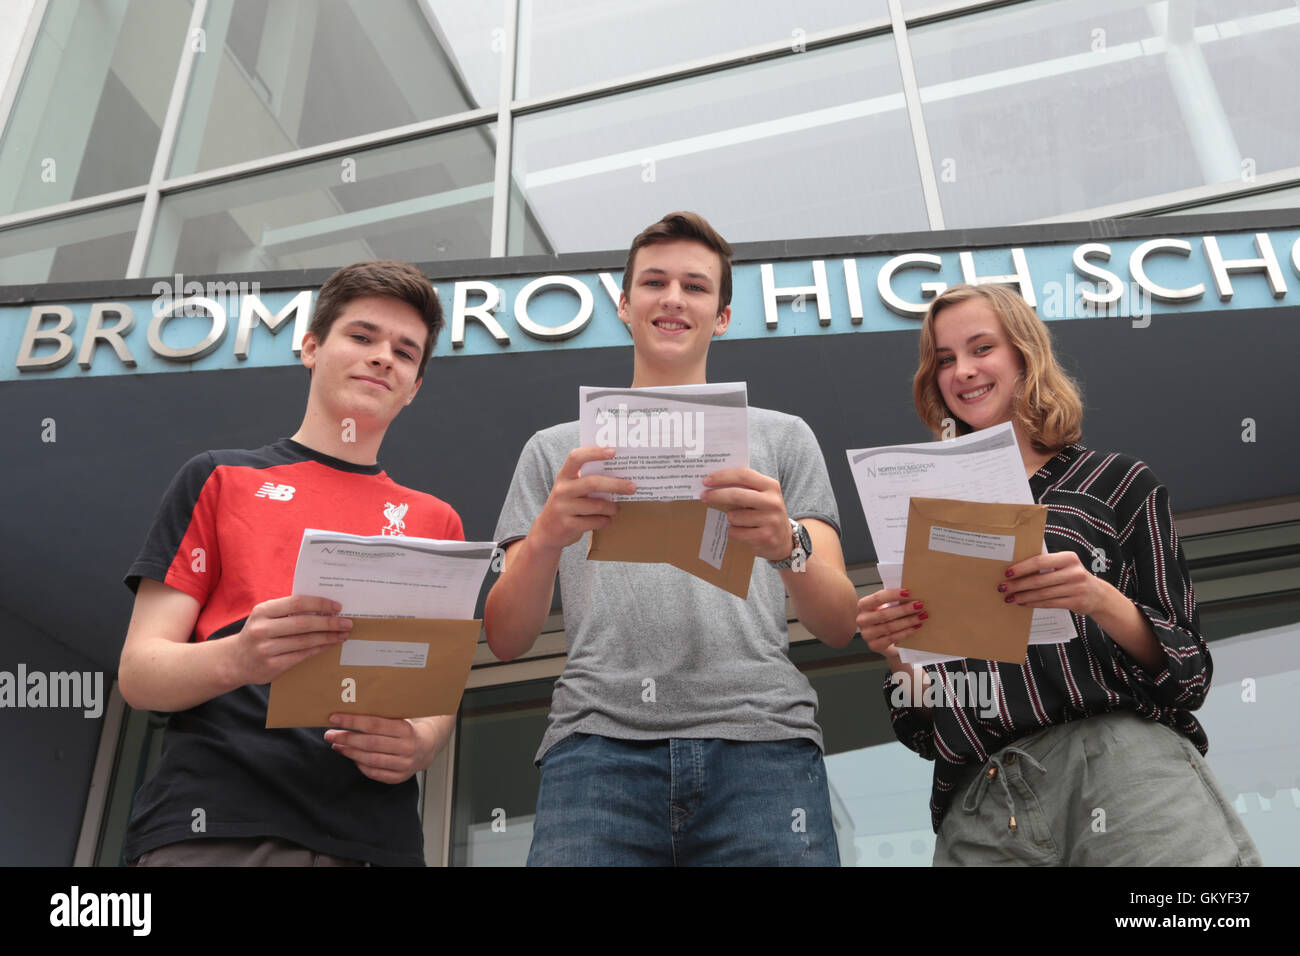 British school leavers receiving their examination results at their school in Bromsgrove, Worcestershire, UK Stock Photo